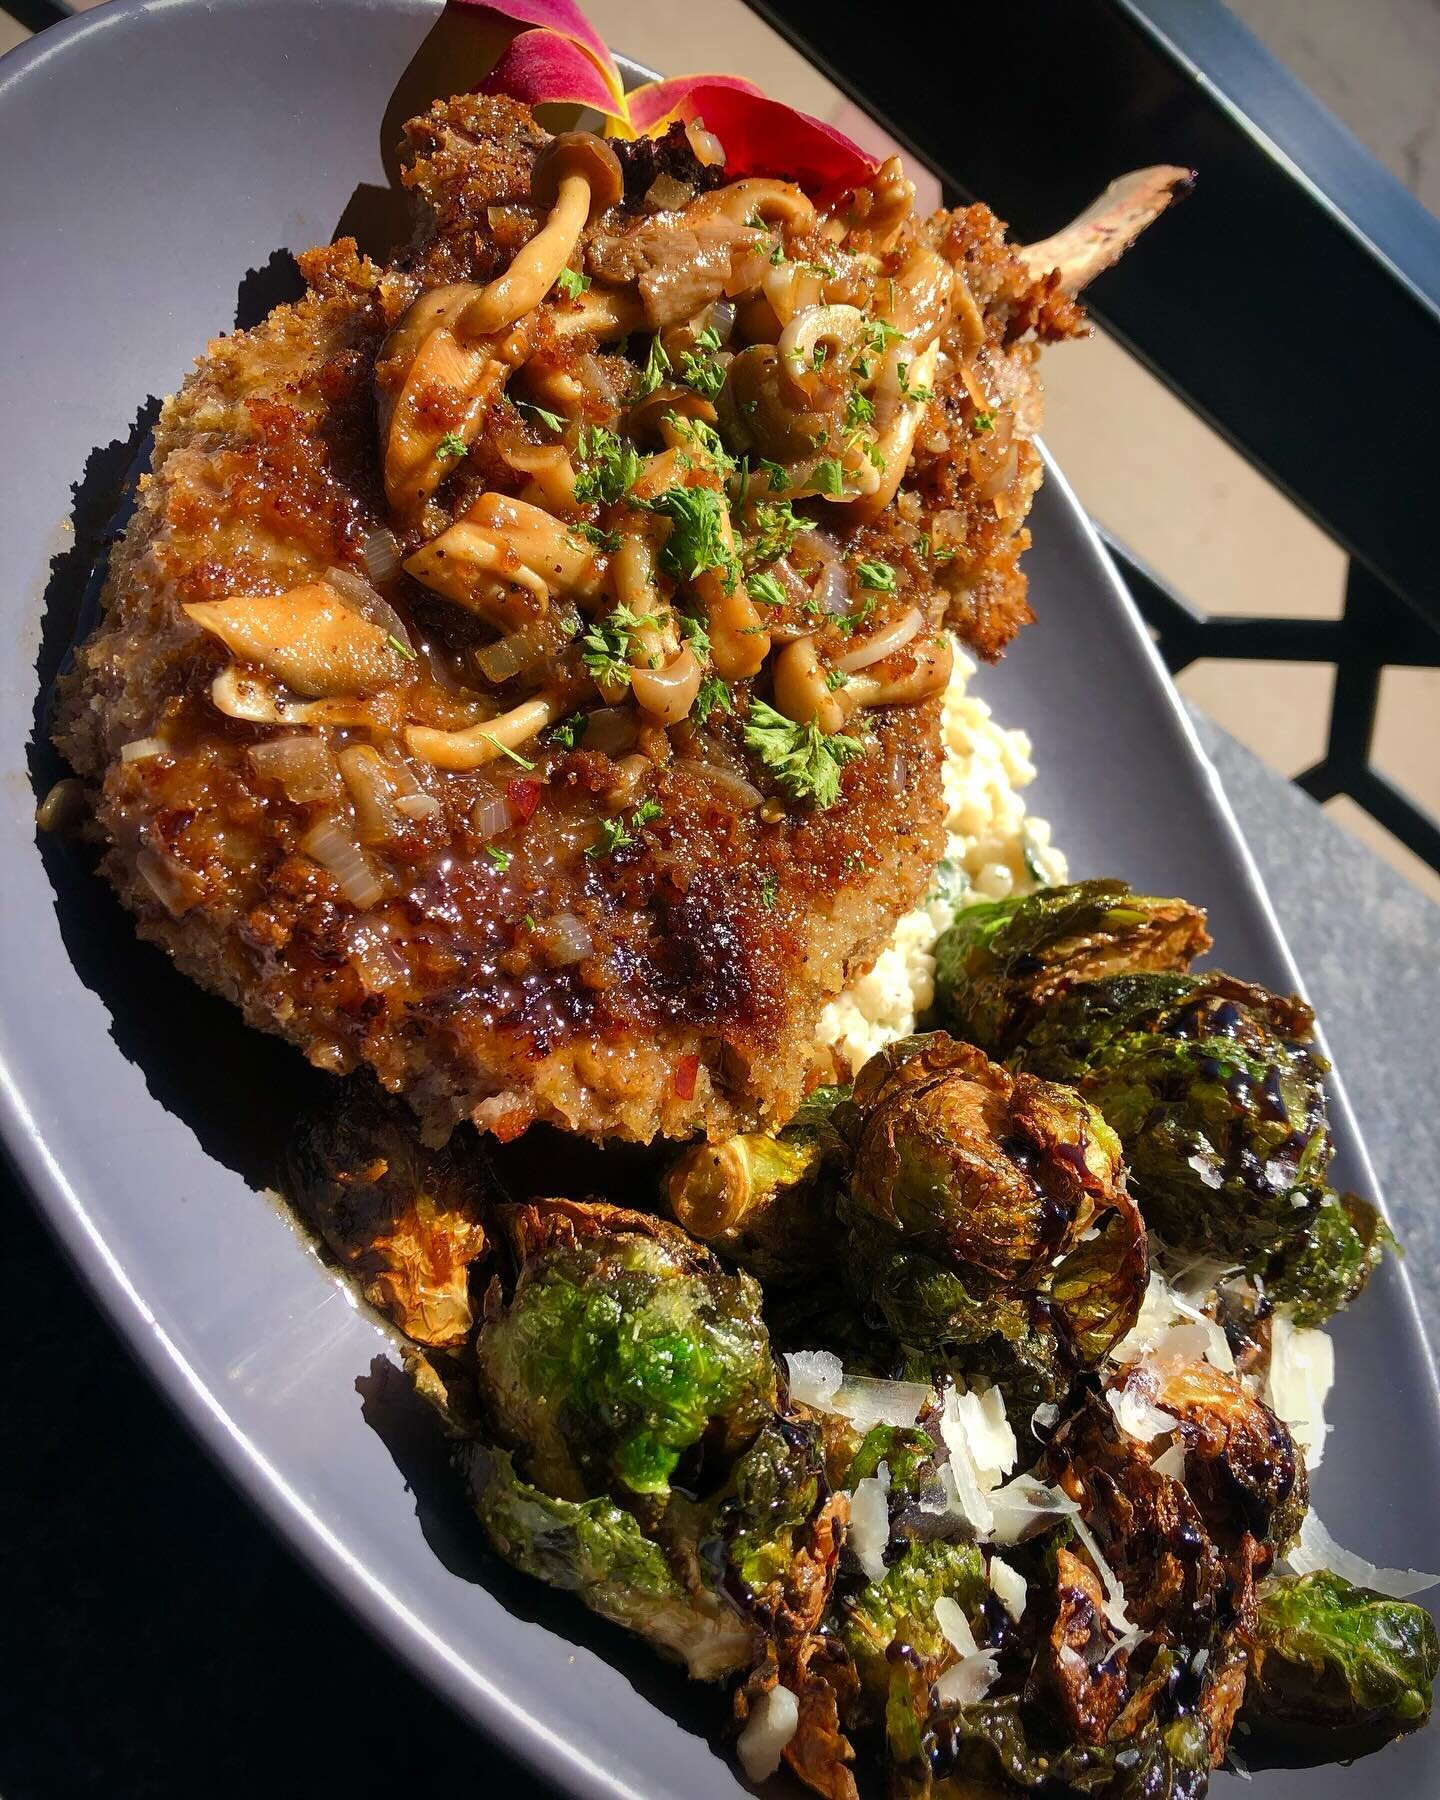 Dinner Special this weekend! 🤌

✨Bone in Veal Marsala over goat cheese and spinach couscous with crispy Brussels!

Come in all weekend and join us!